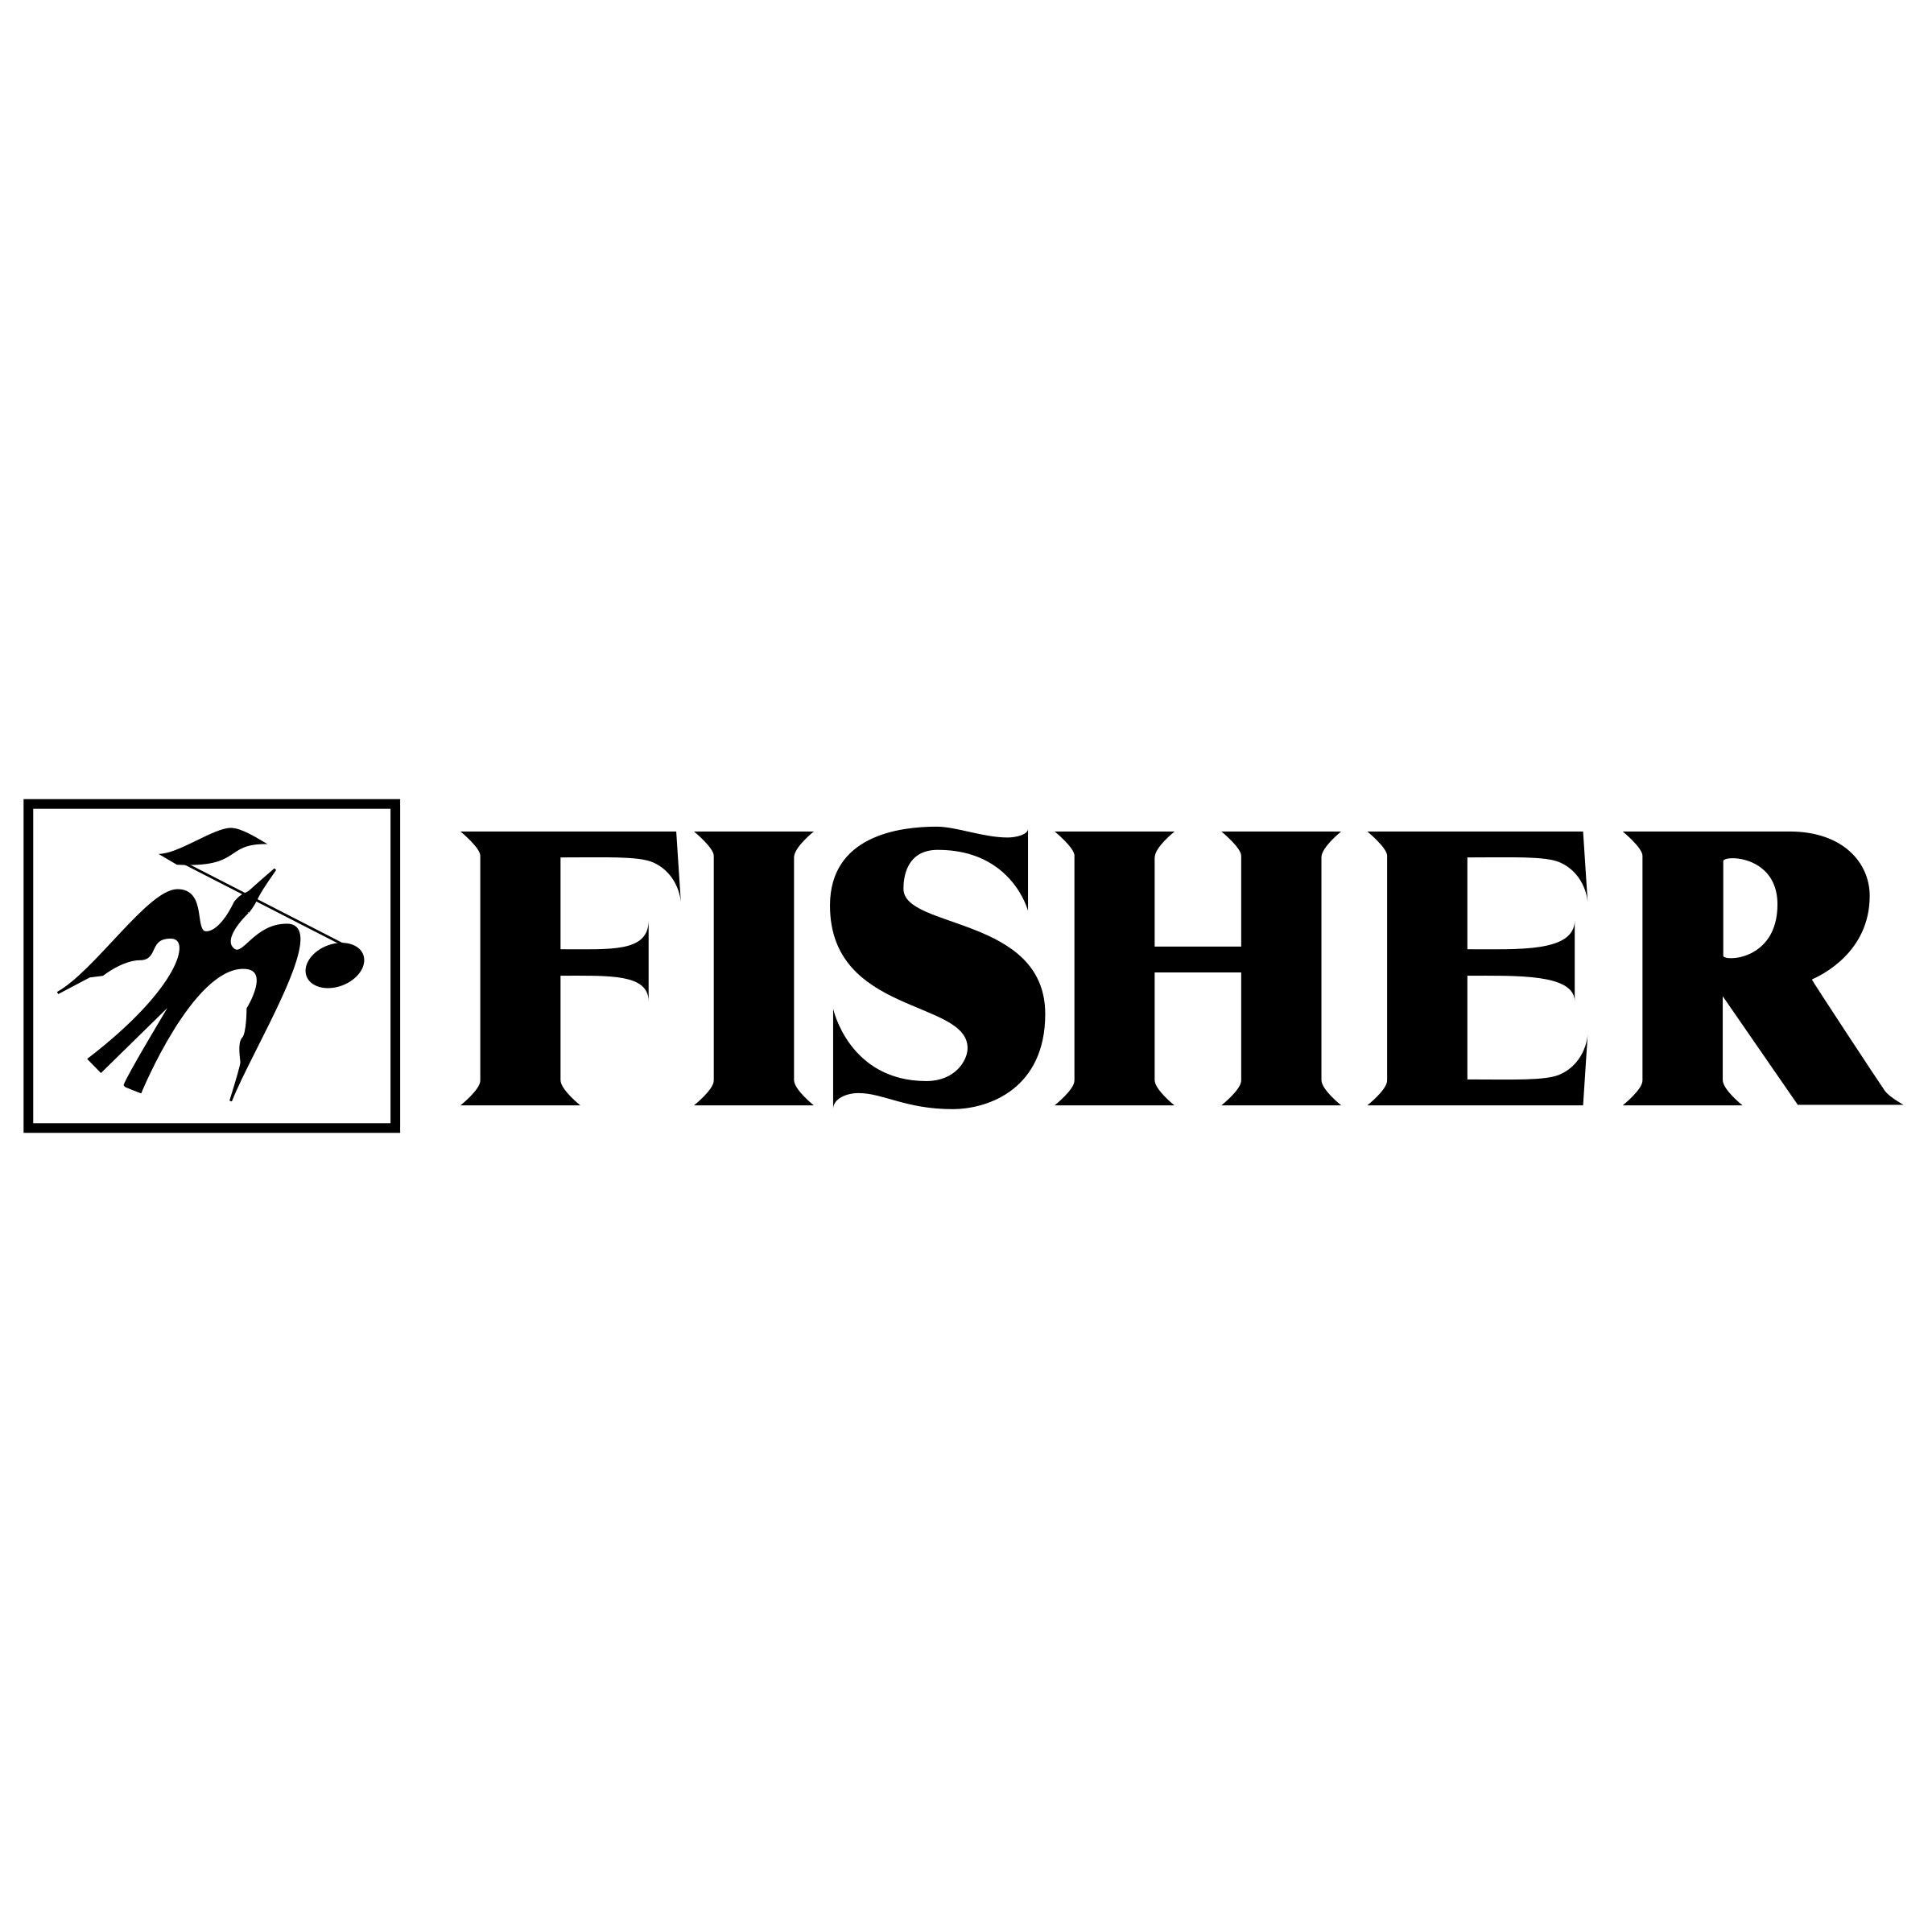 The Fisher Logo - Fisher Logo PNG Transparent & SVG Vector - Freebie Supply